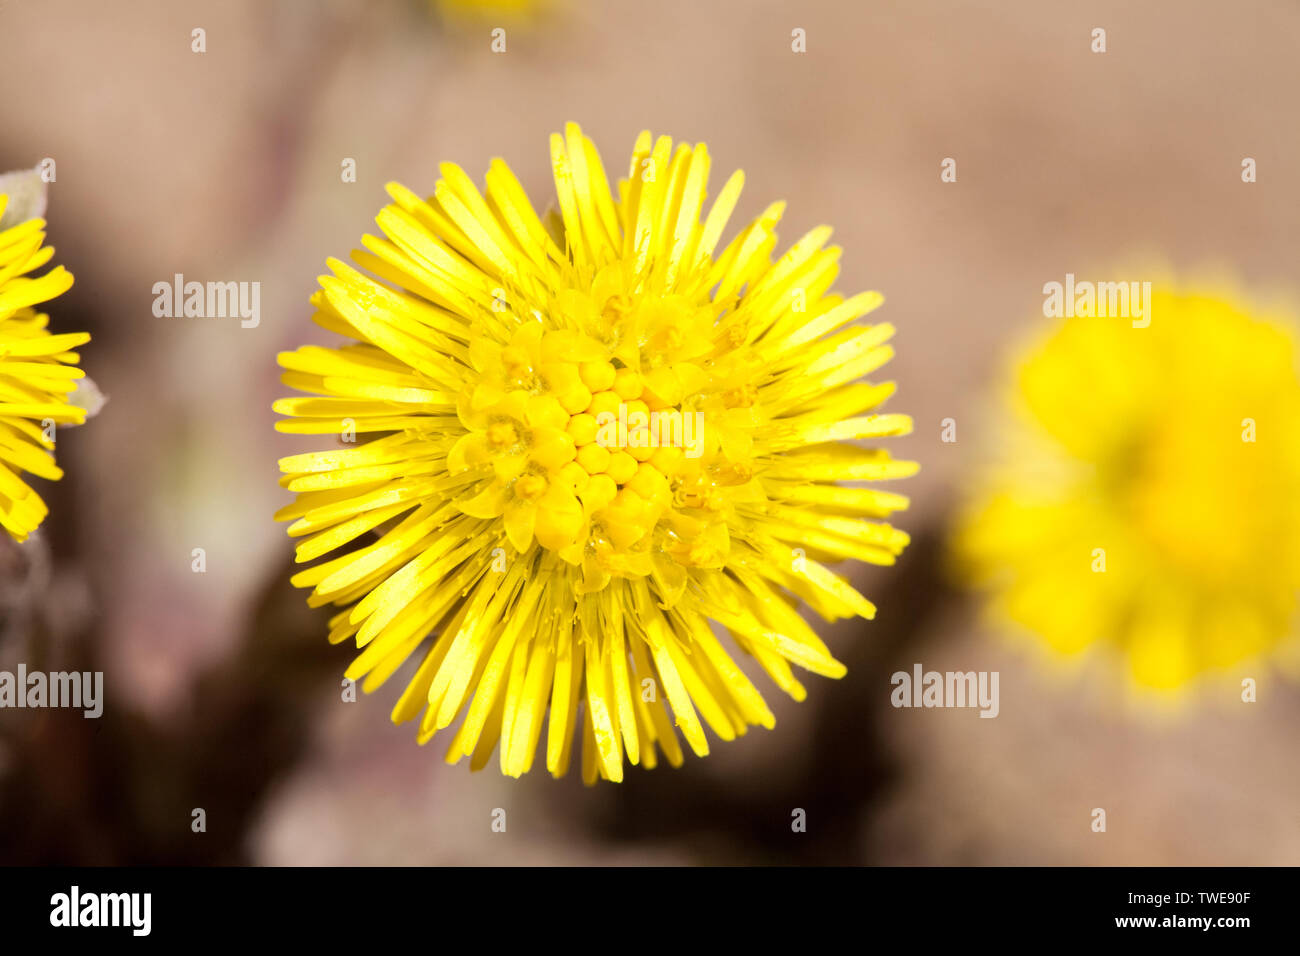 coltsfoot yellow flower Sun like closeup top view on blurry background Stock Photo